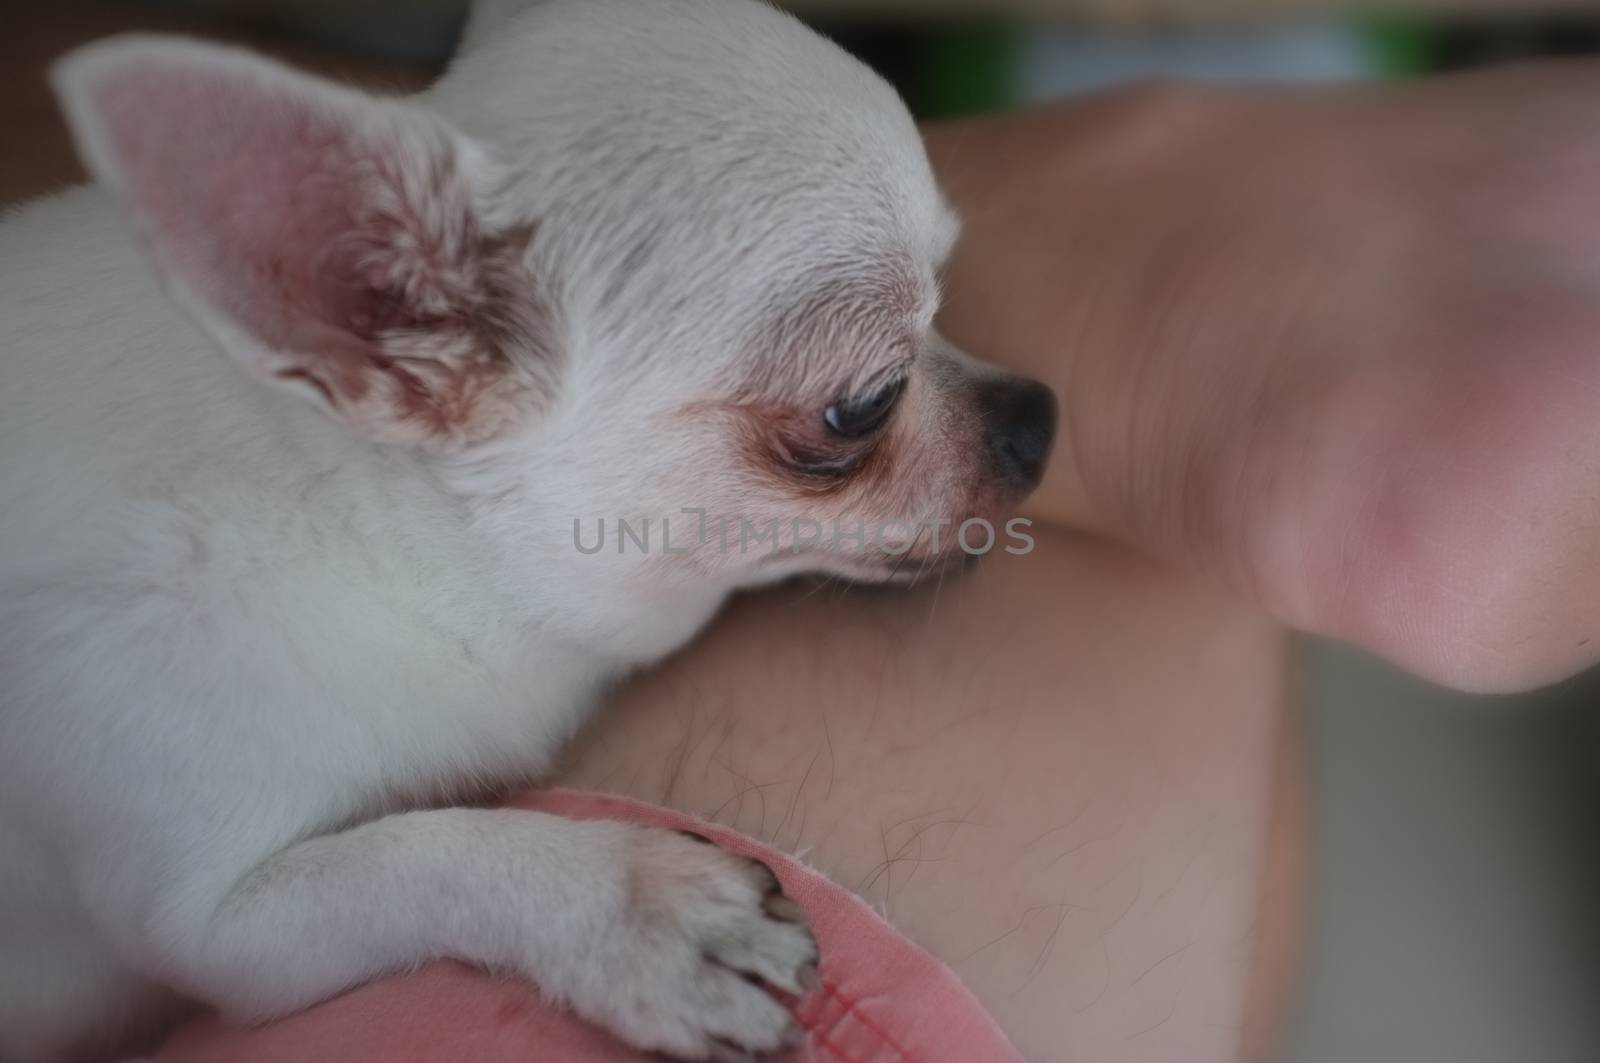 Chihua-hua is resting for man owner petting his pet, Close up. Concept Dog lover by Hepjam